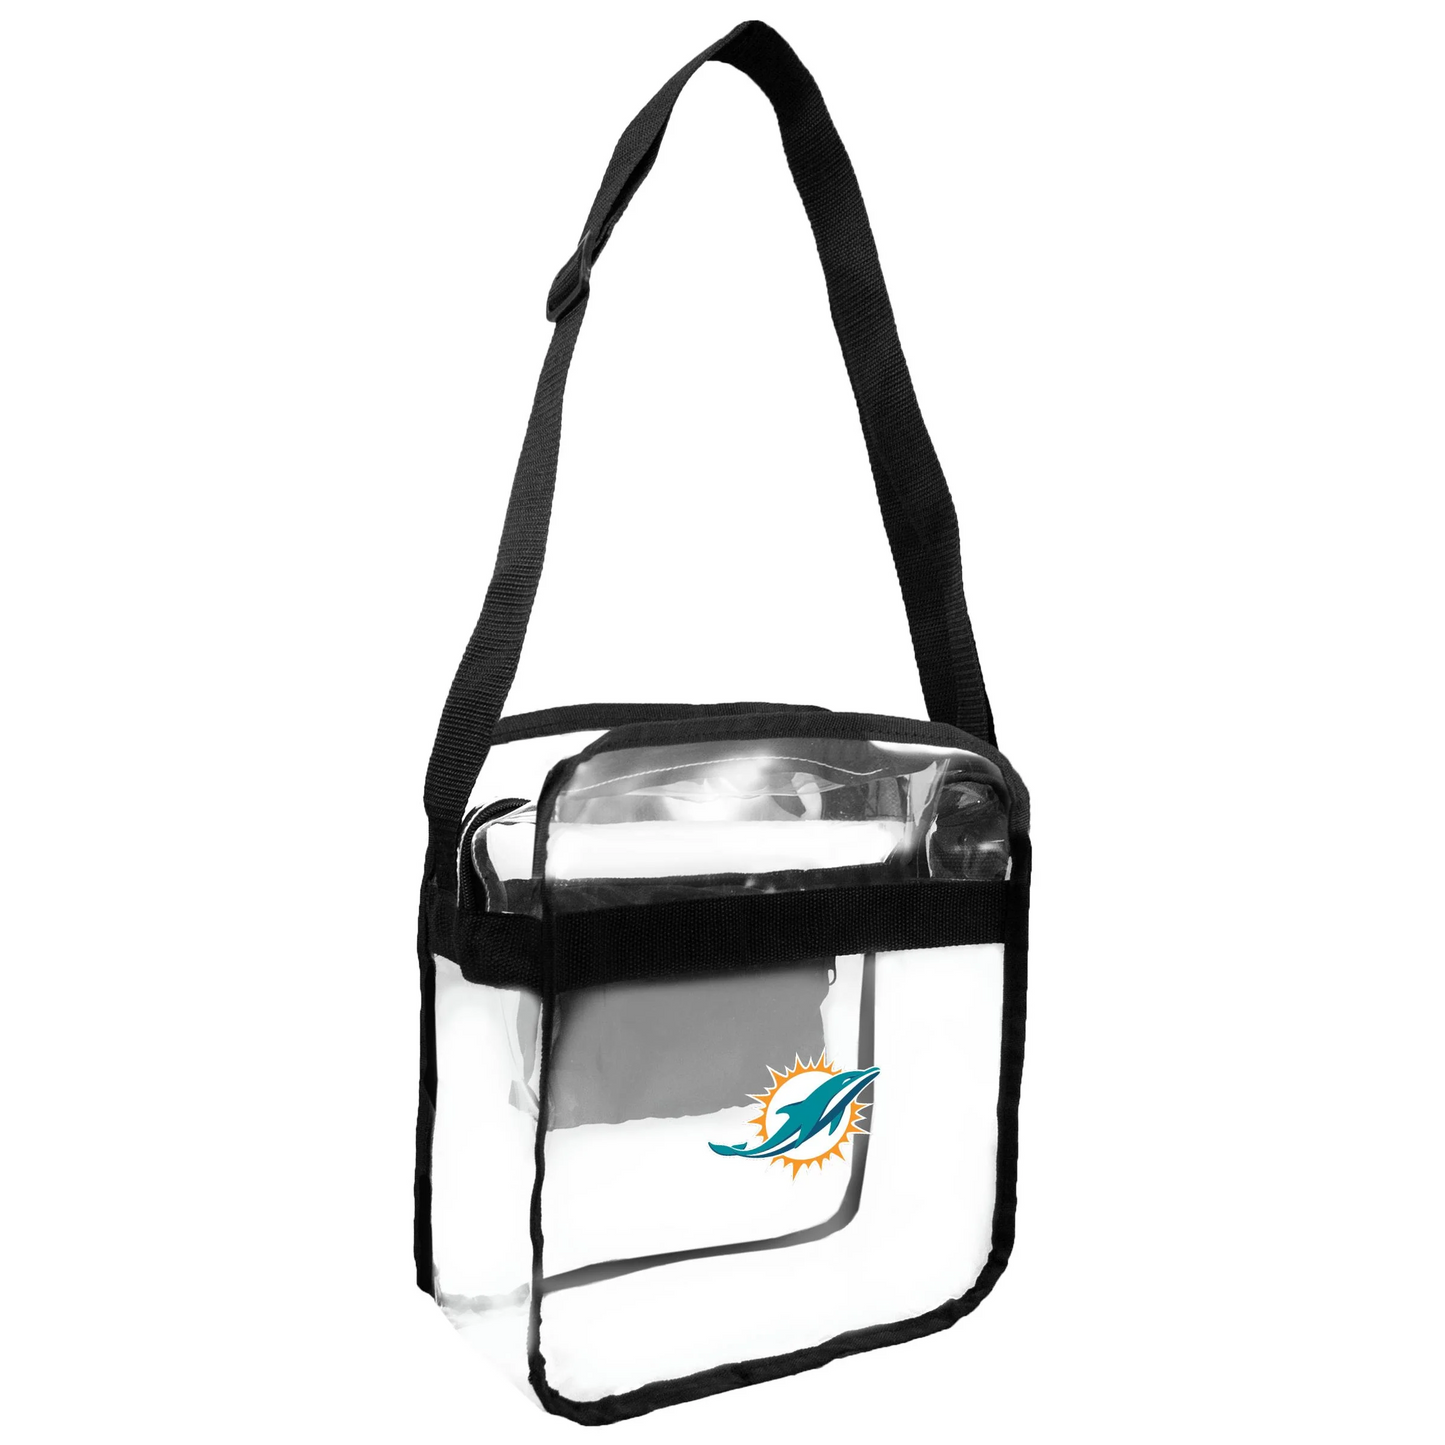 MIAMI DOLPHINS STADIUM-APPROVED CLEAR CARRYALL CROSSBODY BAG